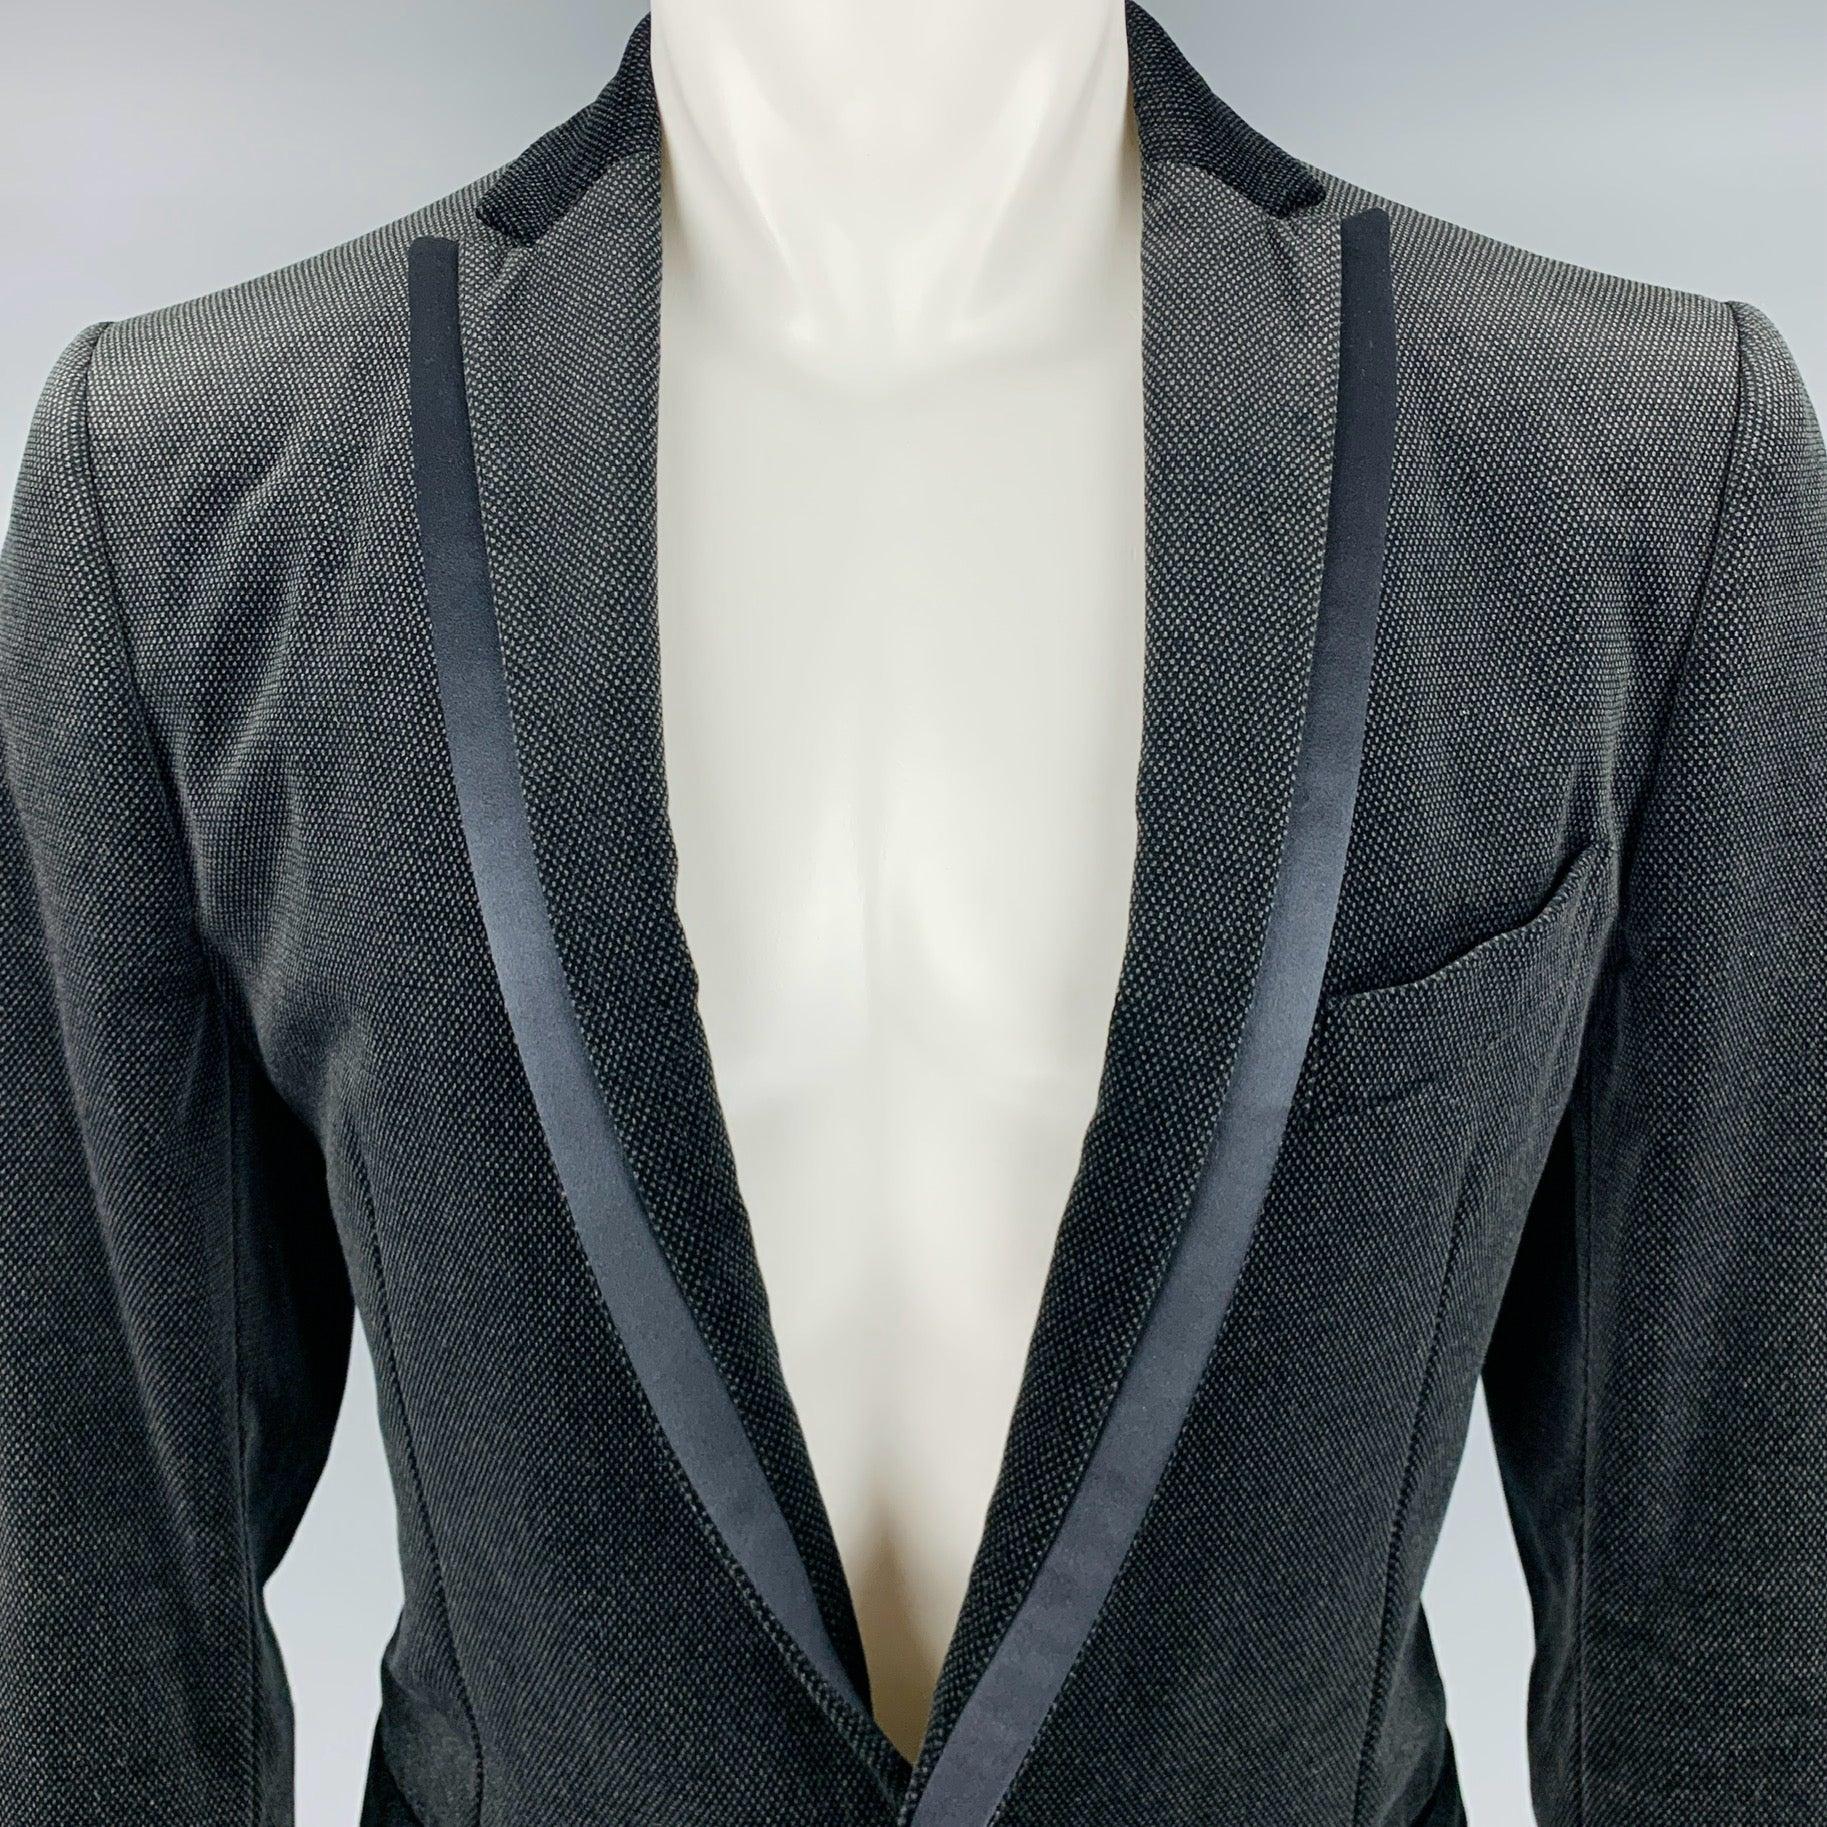 SALVATORE FERRAGAMO sport coat
in a black cotton velvet fabric featuring nailhead pattern, notch lapel, and single button closure. Made in Italy.Excellent Pre-Owned Condition. 

Marked:   50 

Measurements: 
 
Shoulder: 18 inches Chest: 40 inches